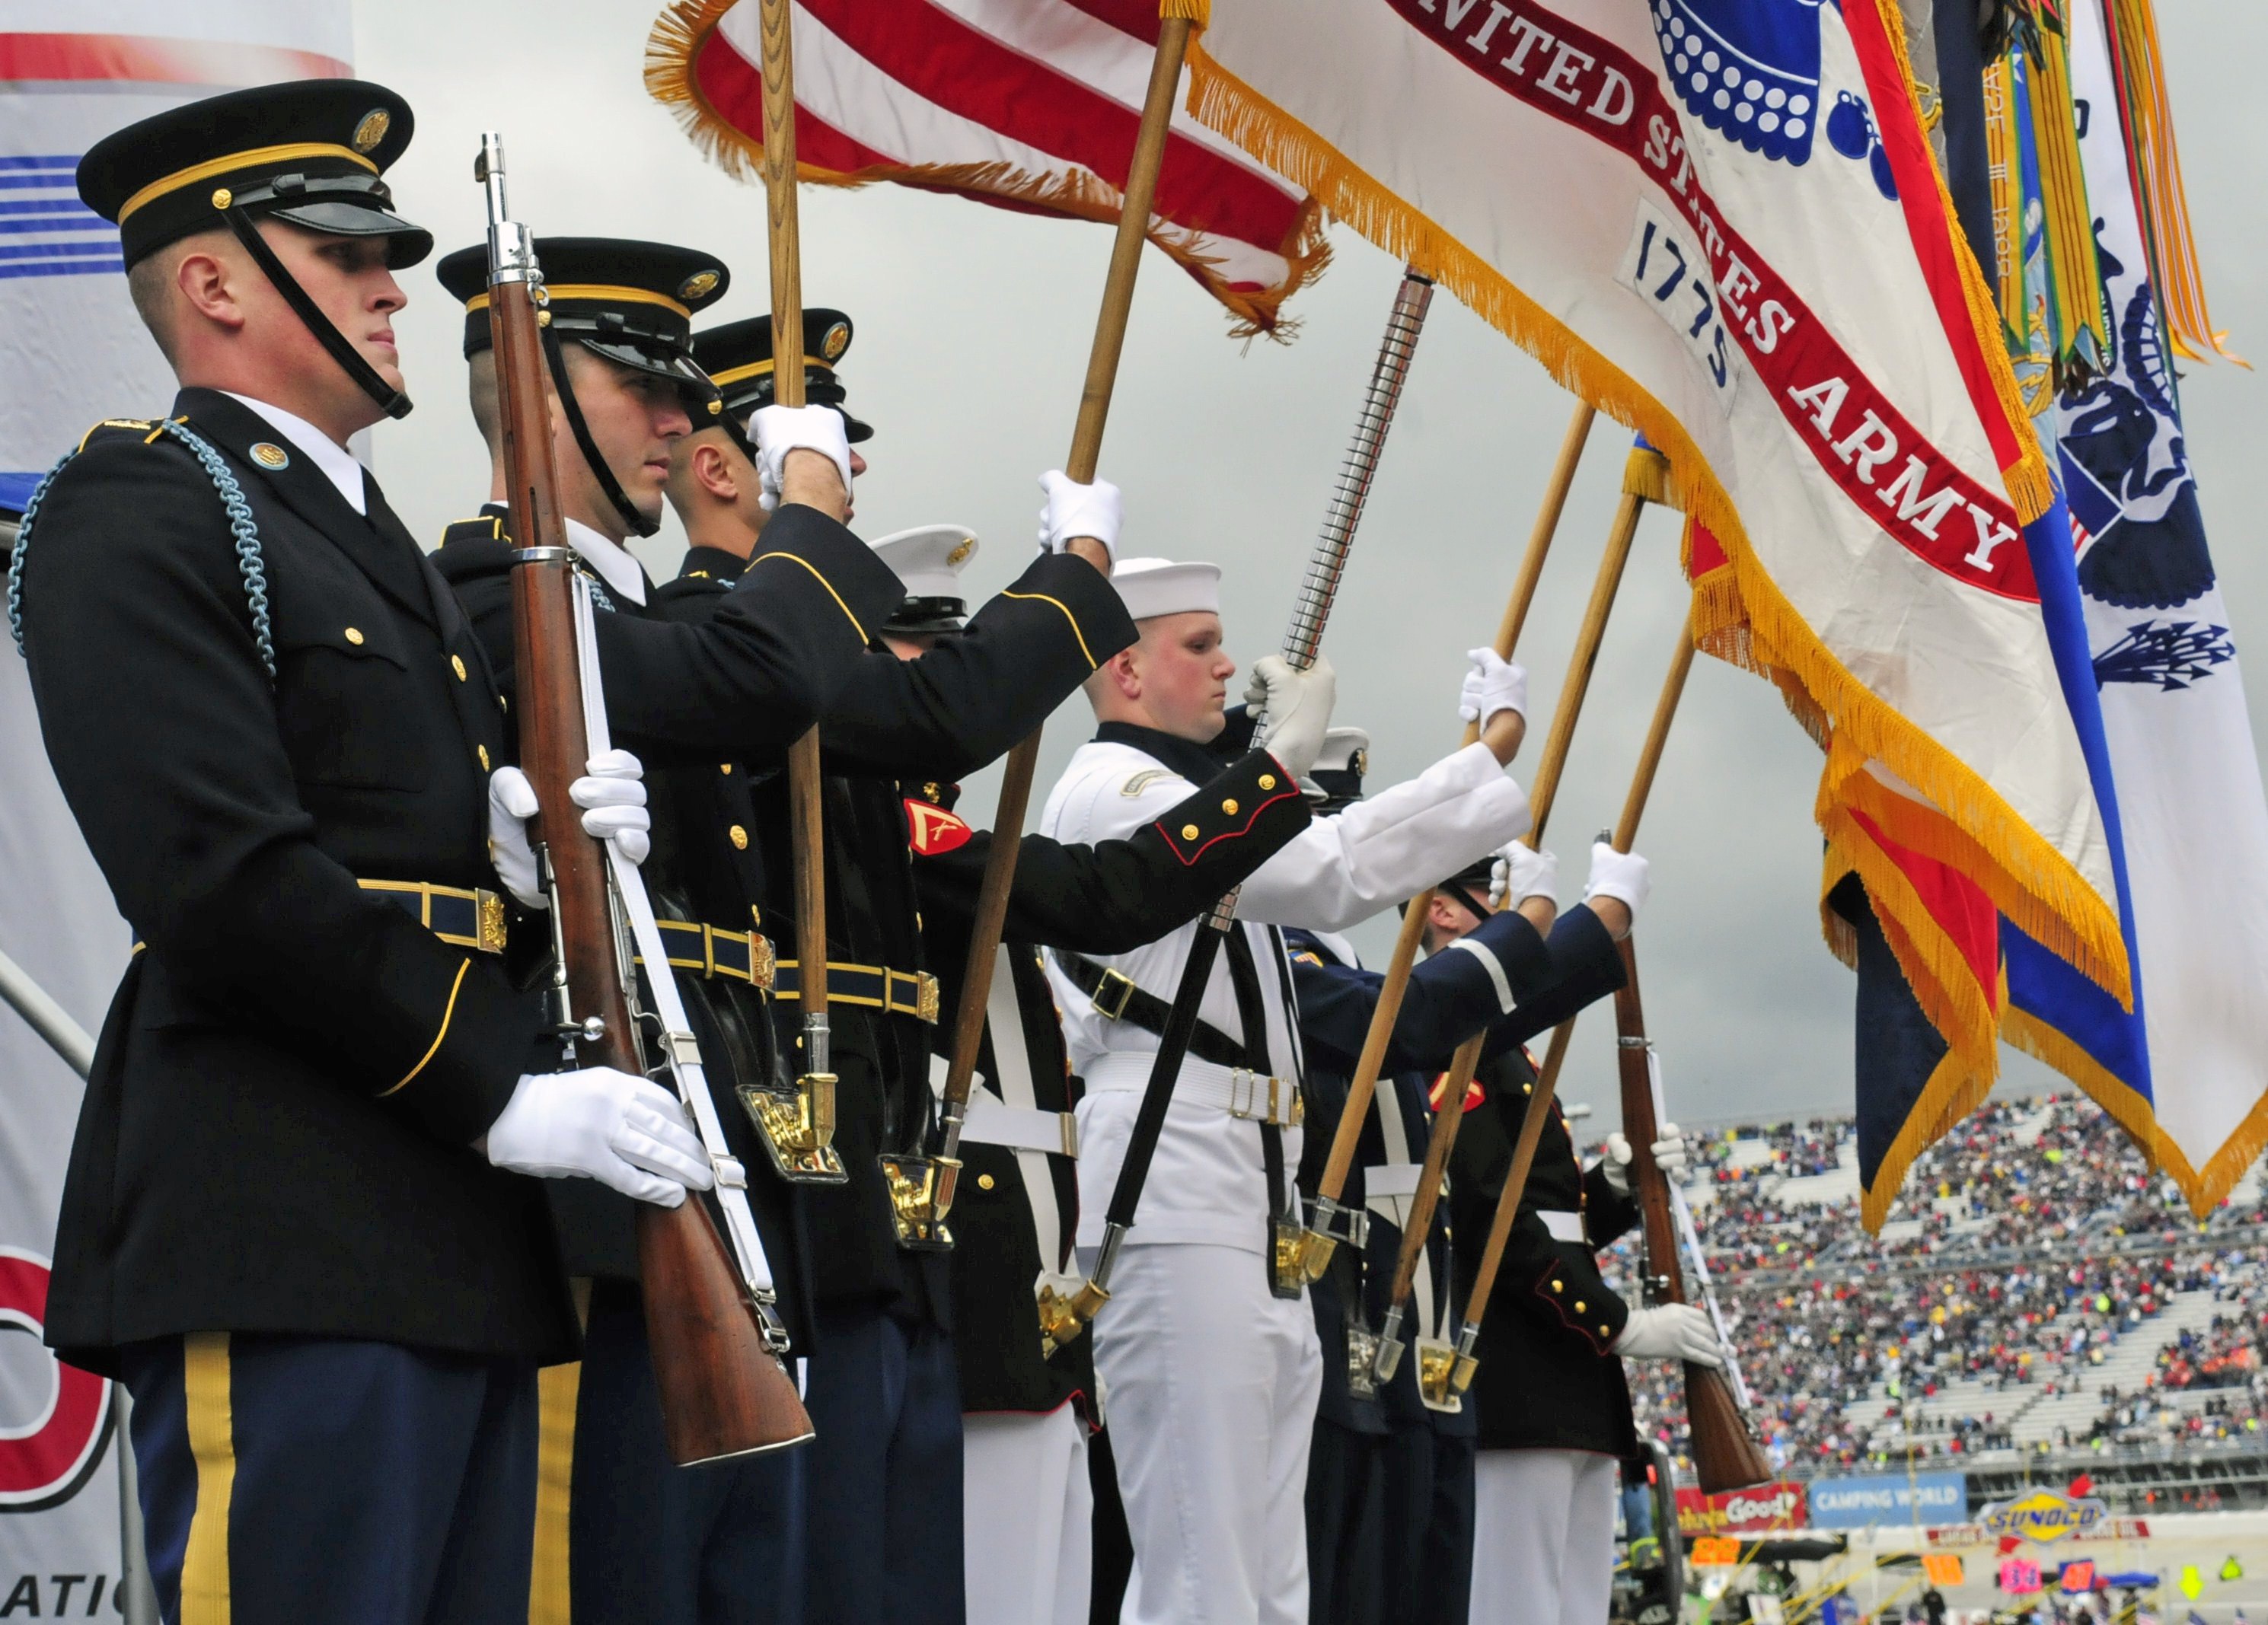 Nascar Joint Armed Forces Color Guard Article The United States Army